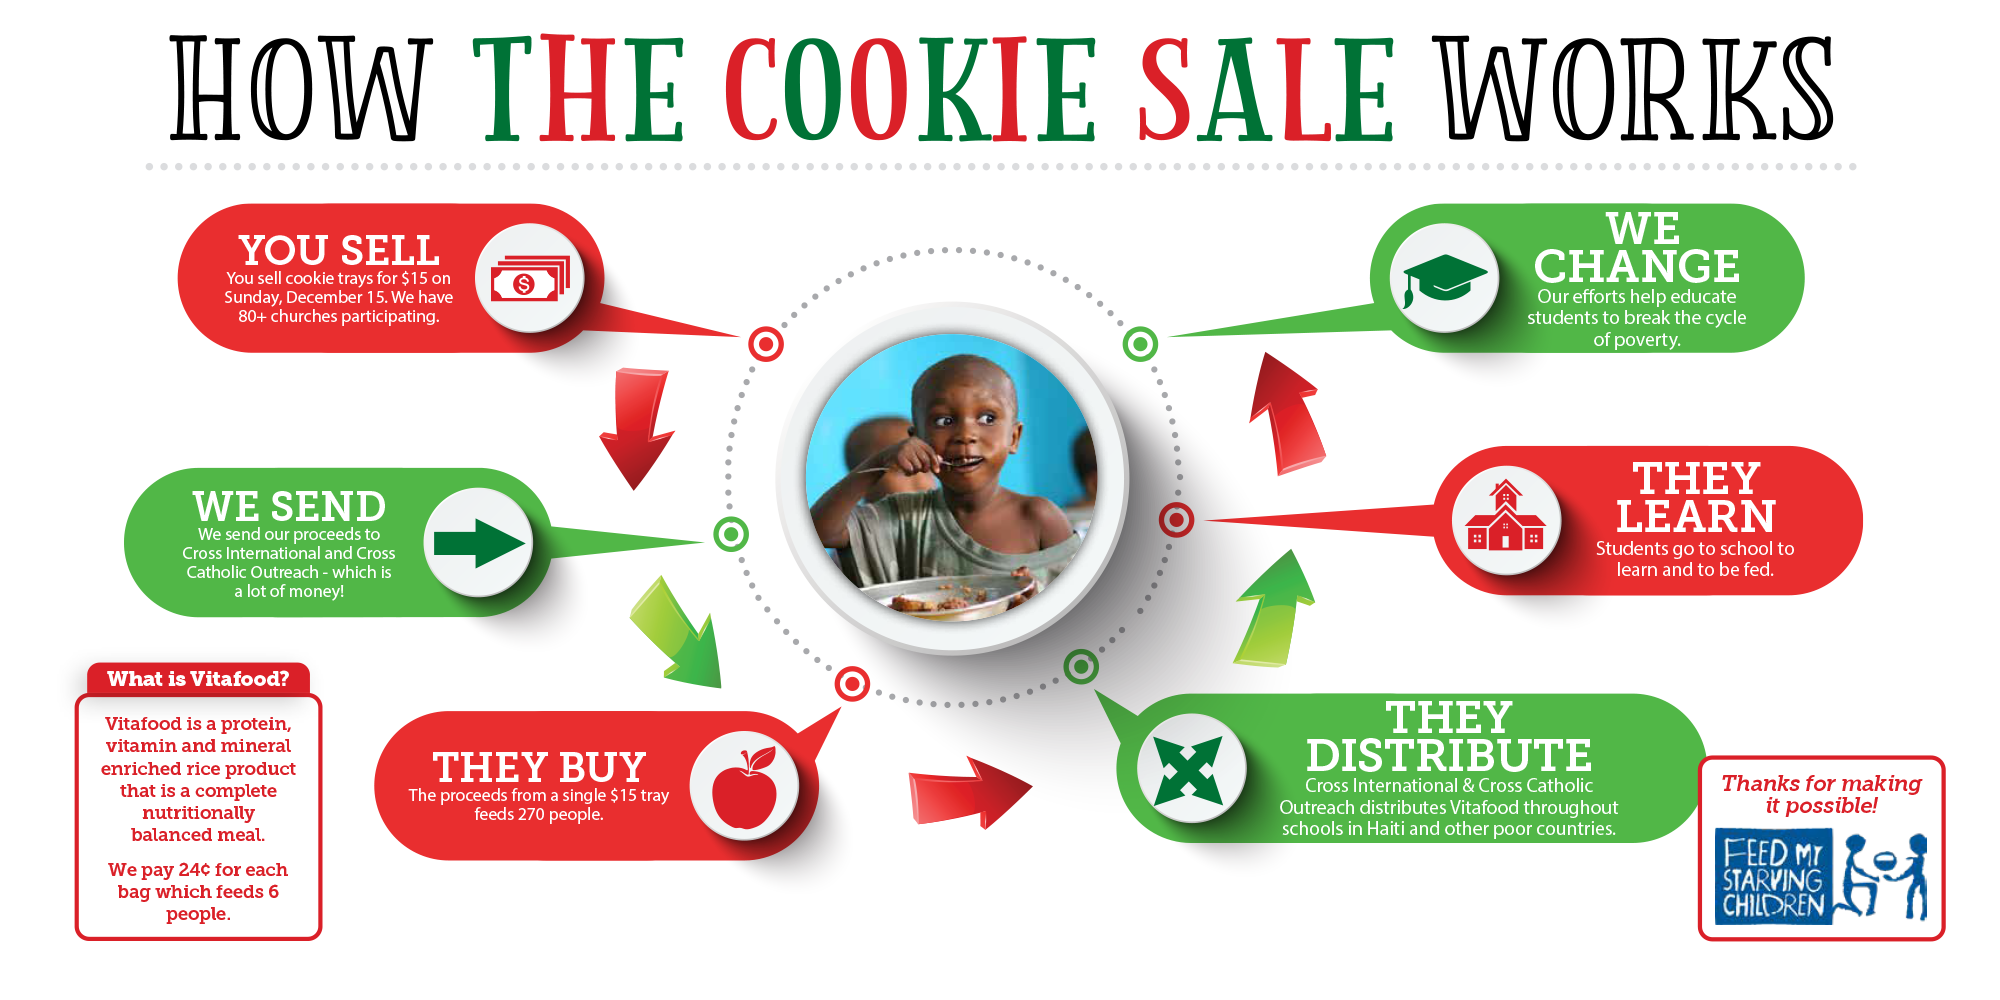 How The Cookie Sale Works